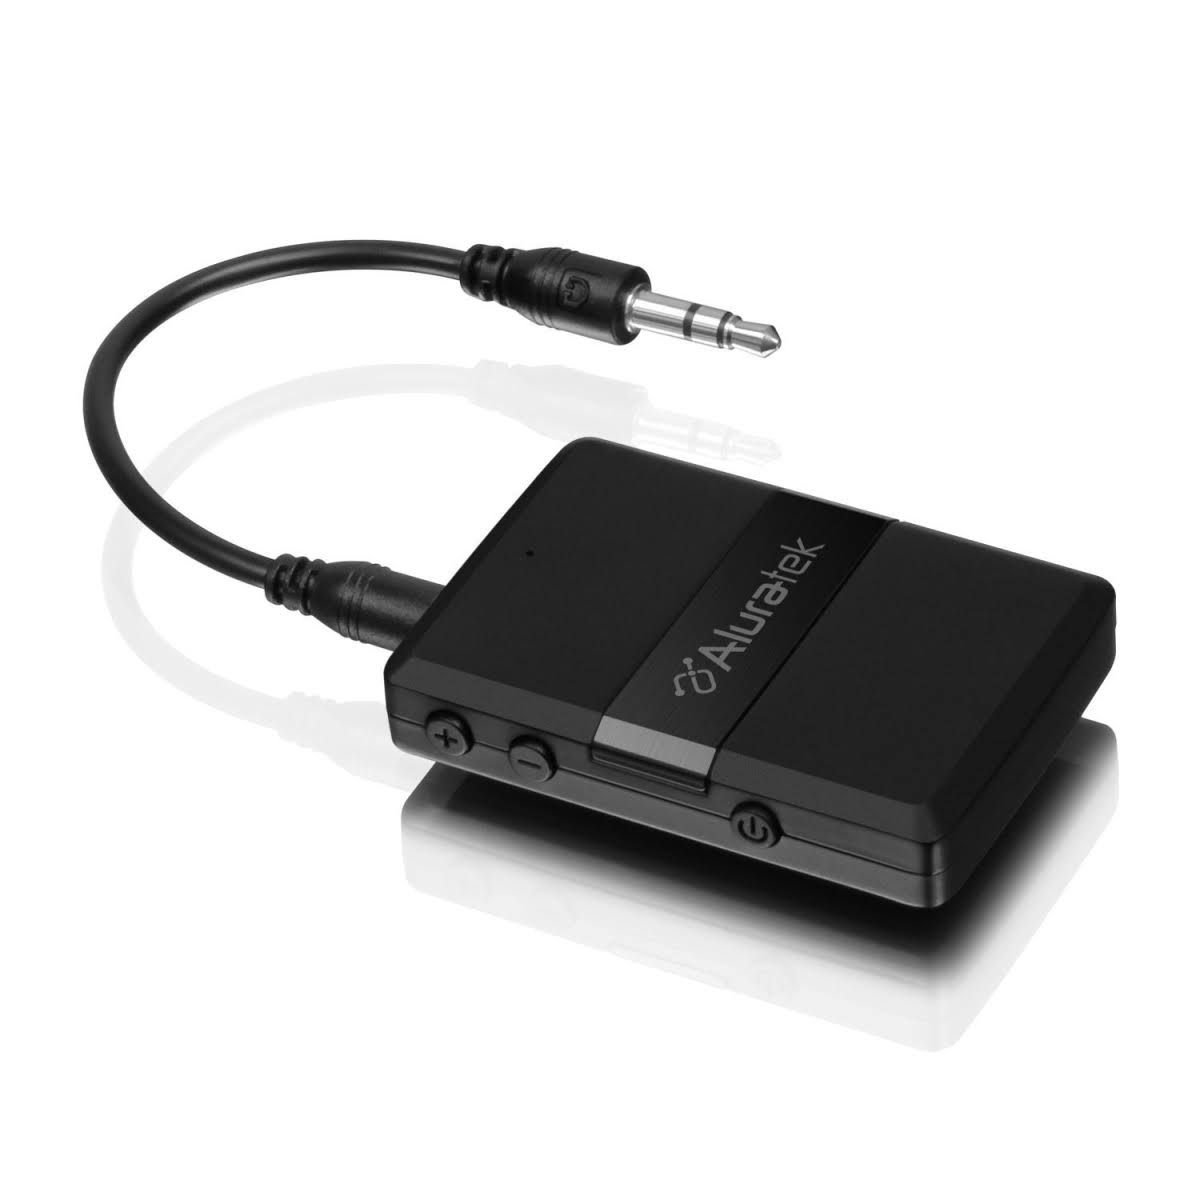 Aluratek Universal Bluetooth Audio Receiver and Transmitter with Built in Battery, Black